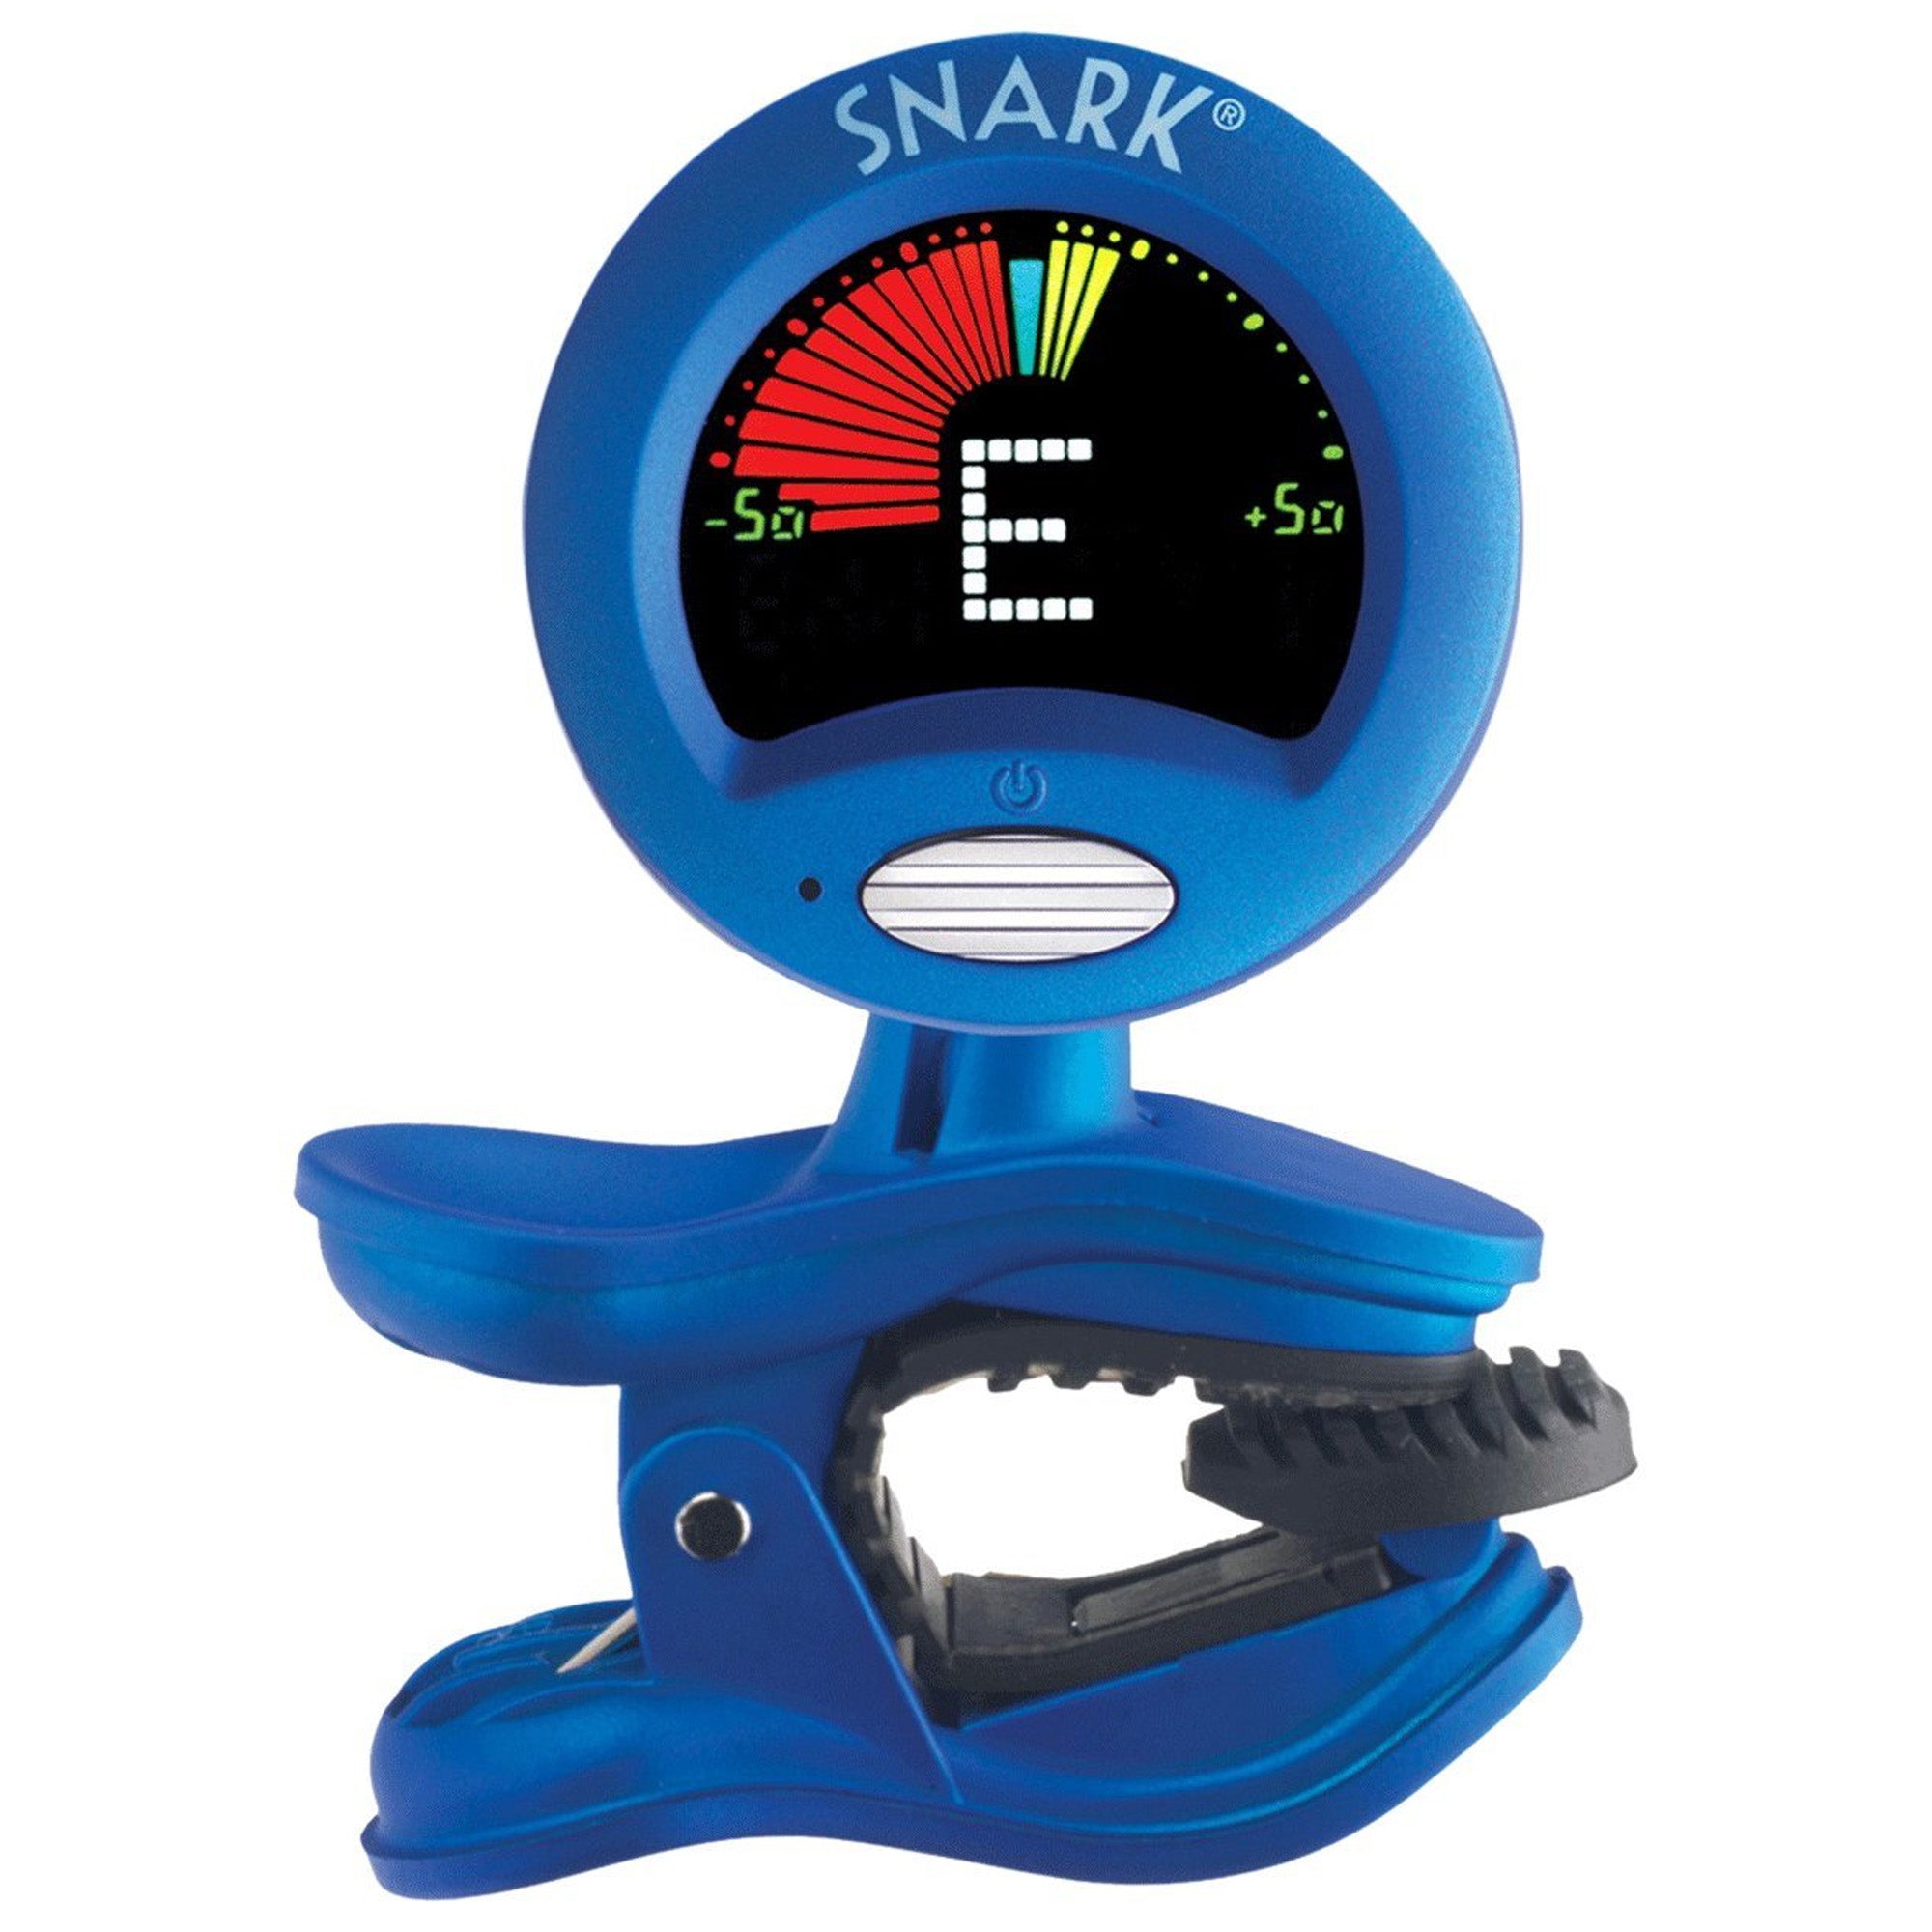 It's a blue clip with a circlular
gauge on top that says 'Snark!' and produces measurements ranging from -50 to 50. The unit of measurement is not specified.